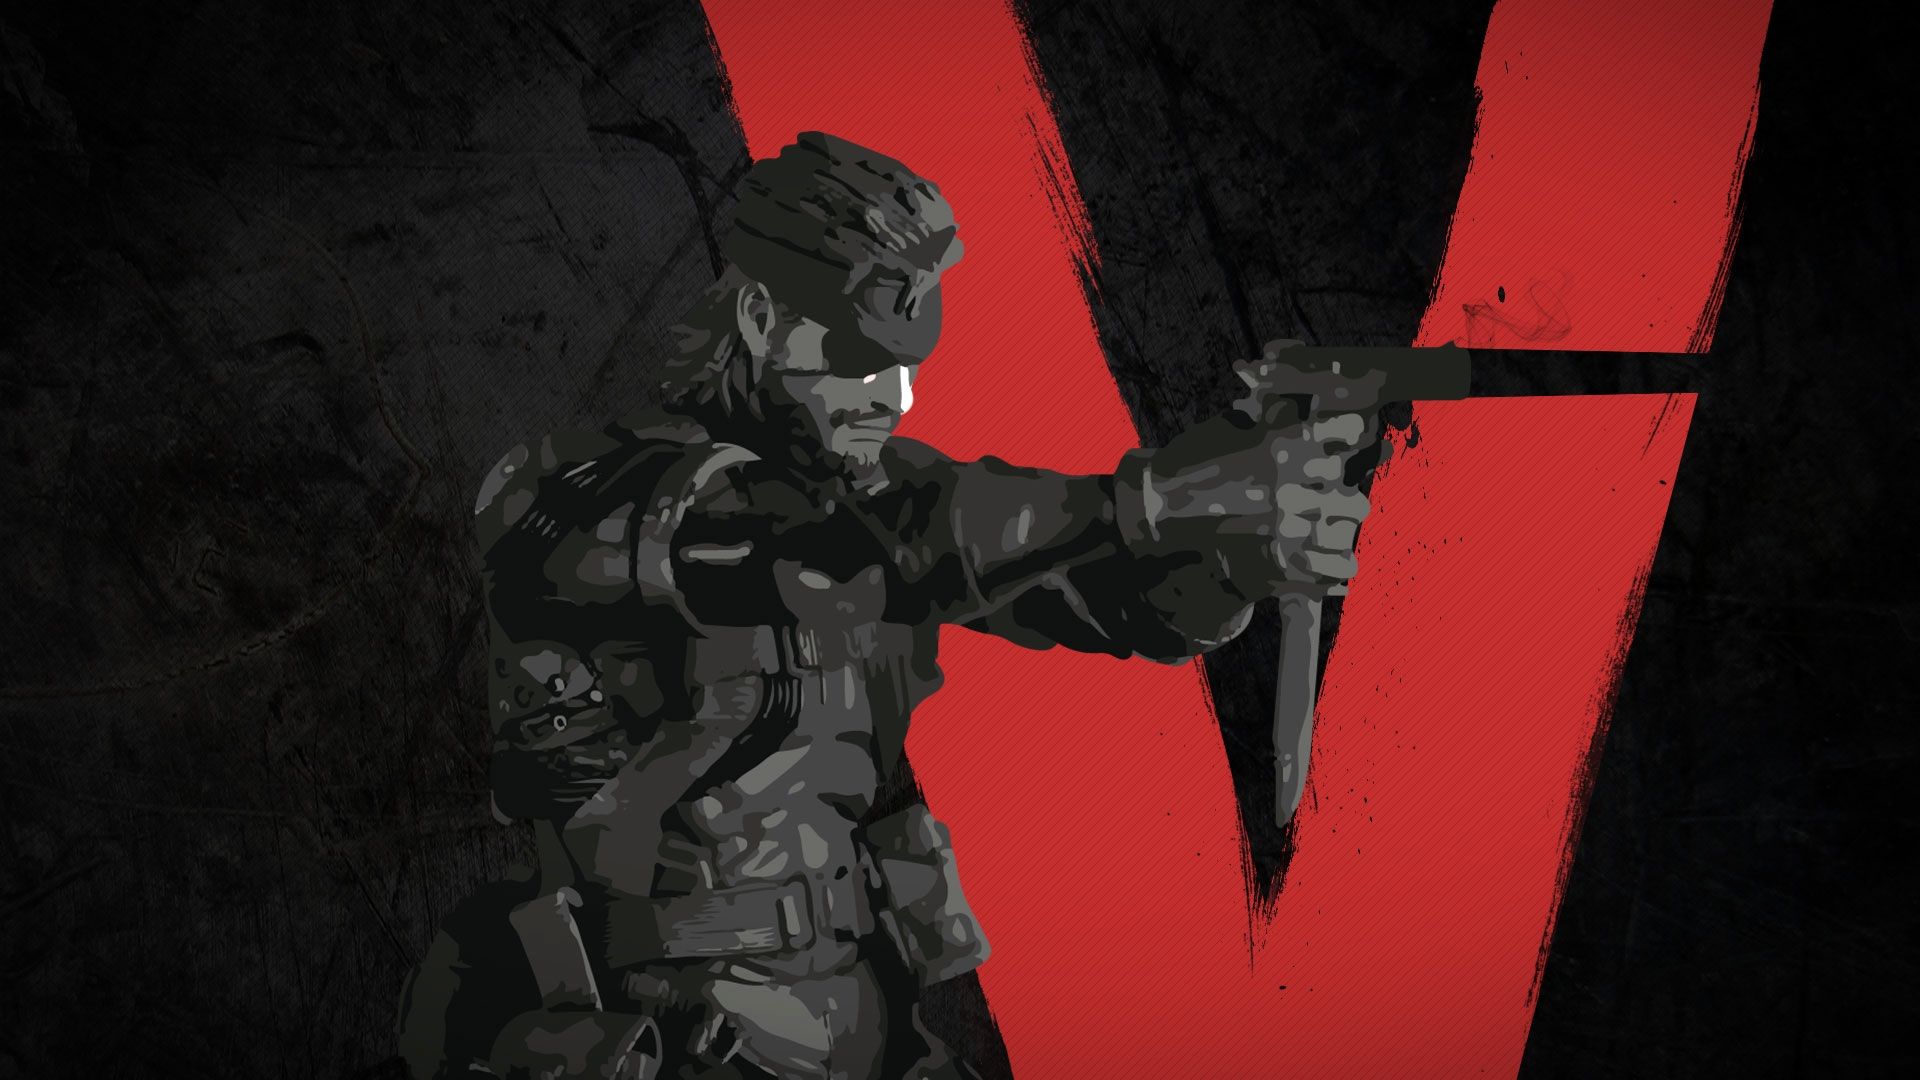 Awesome Mgs5 Wallpaper Of the Day